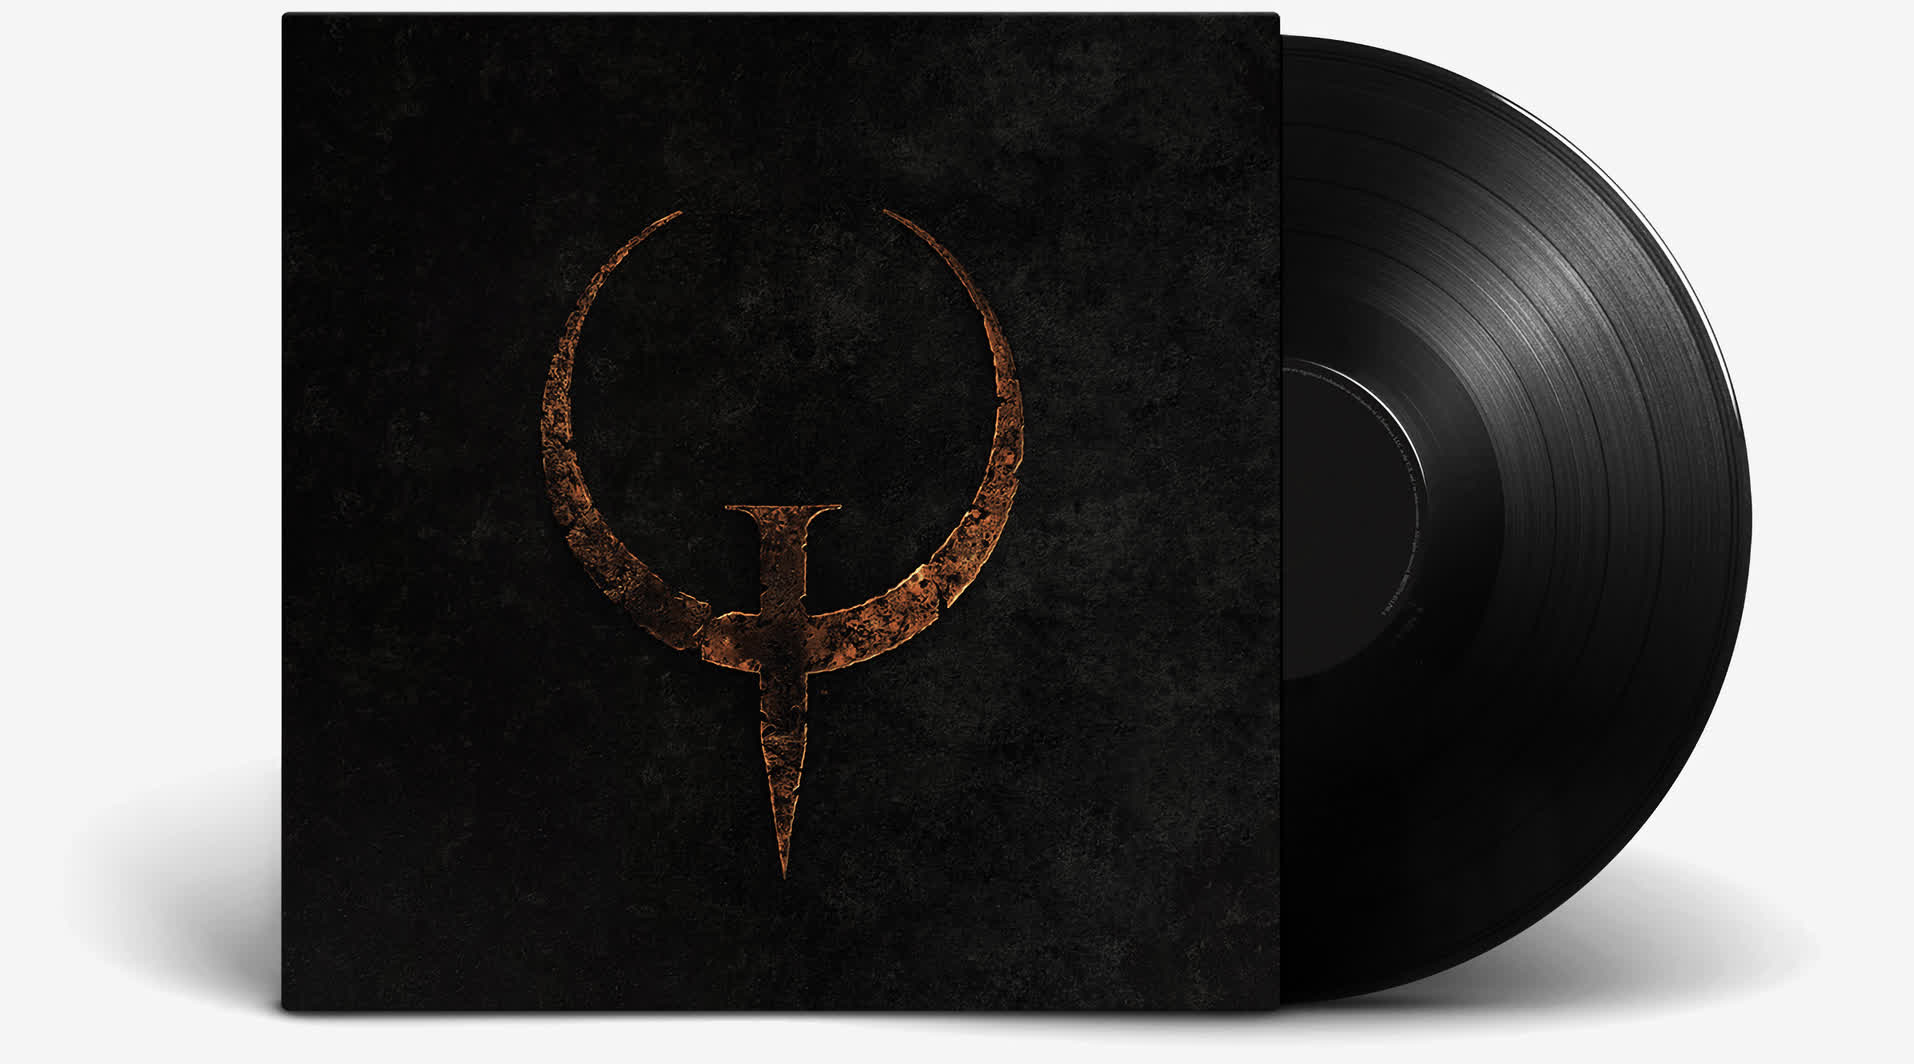 Quake soundtrack from Nine Inch Nails is now available on vinyl